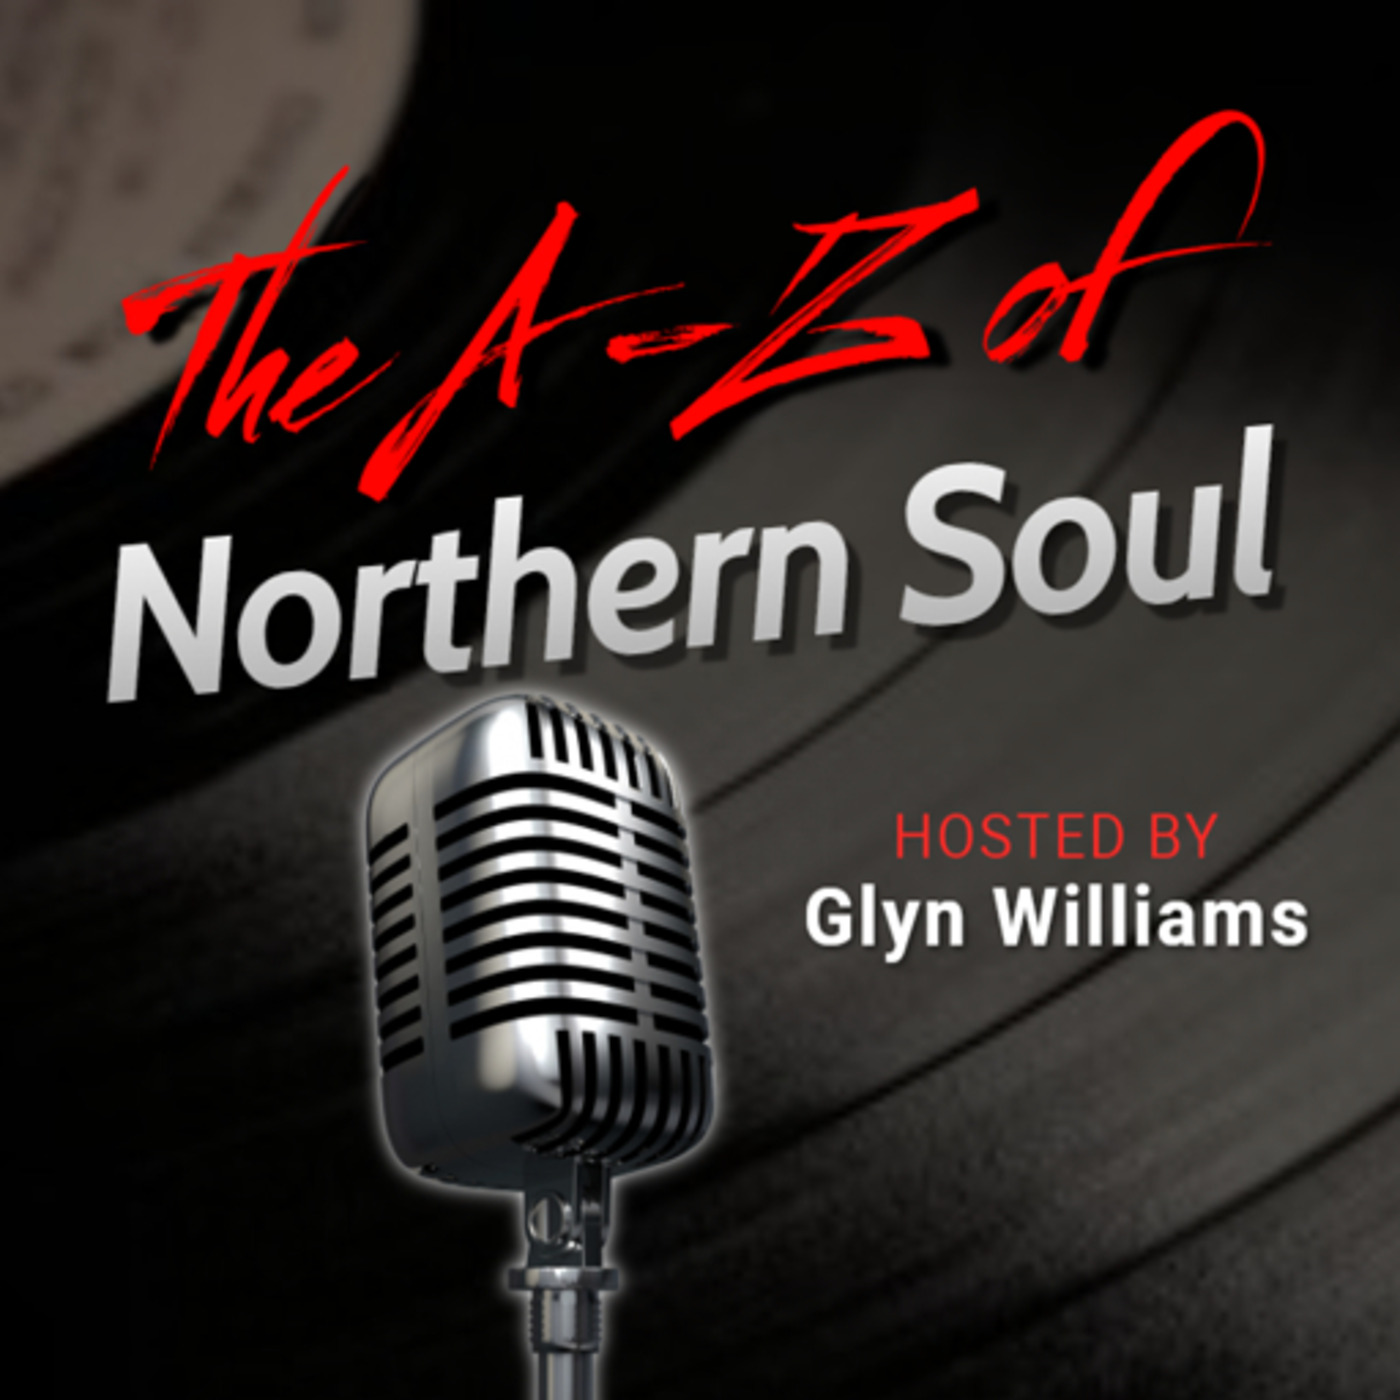 The A-Z of Northern Soul E017